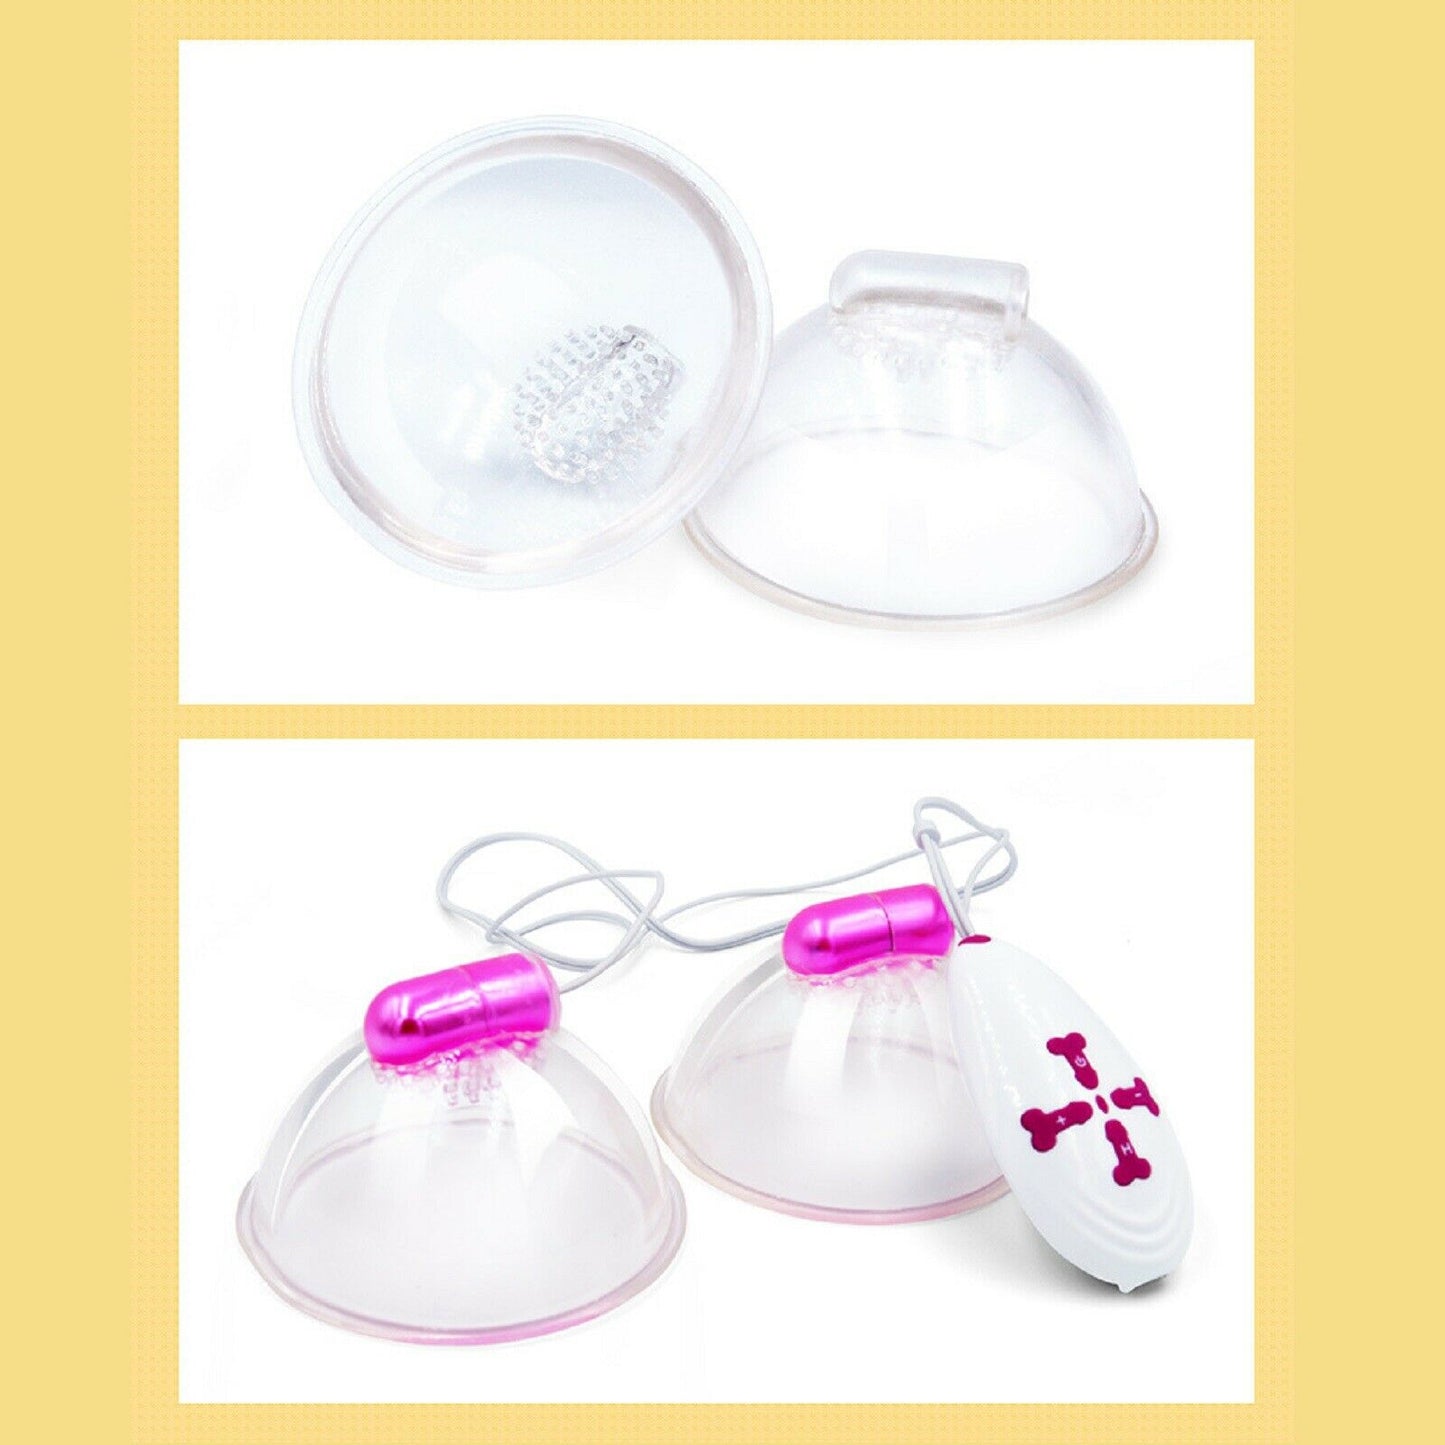 Vibrating Nipple Clamp Vibrator Suction Cup Breast Stimulator Female Sex Toy NEW